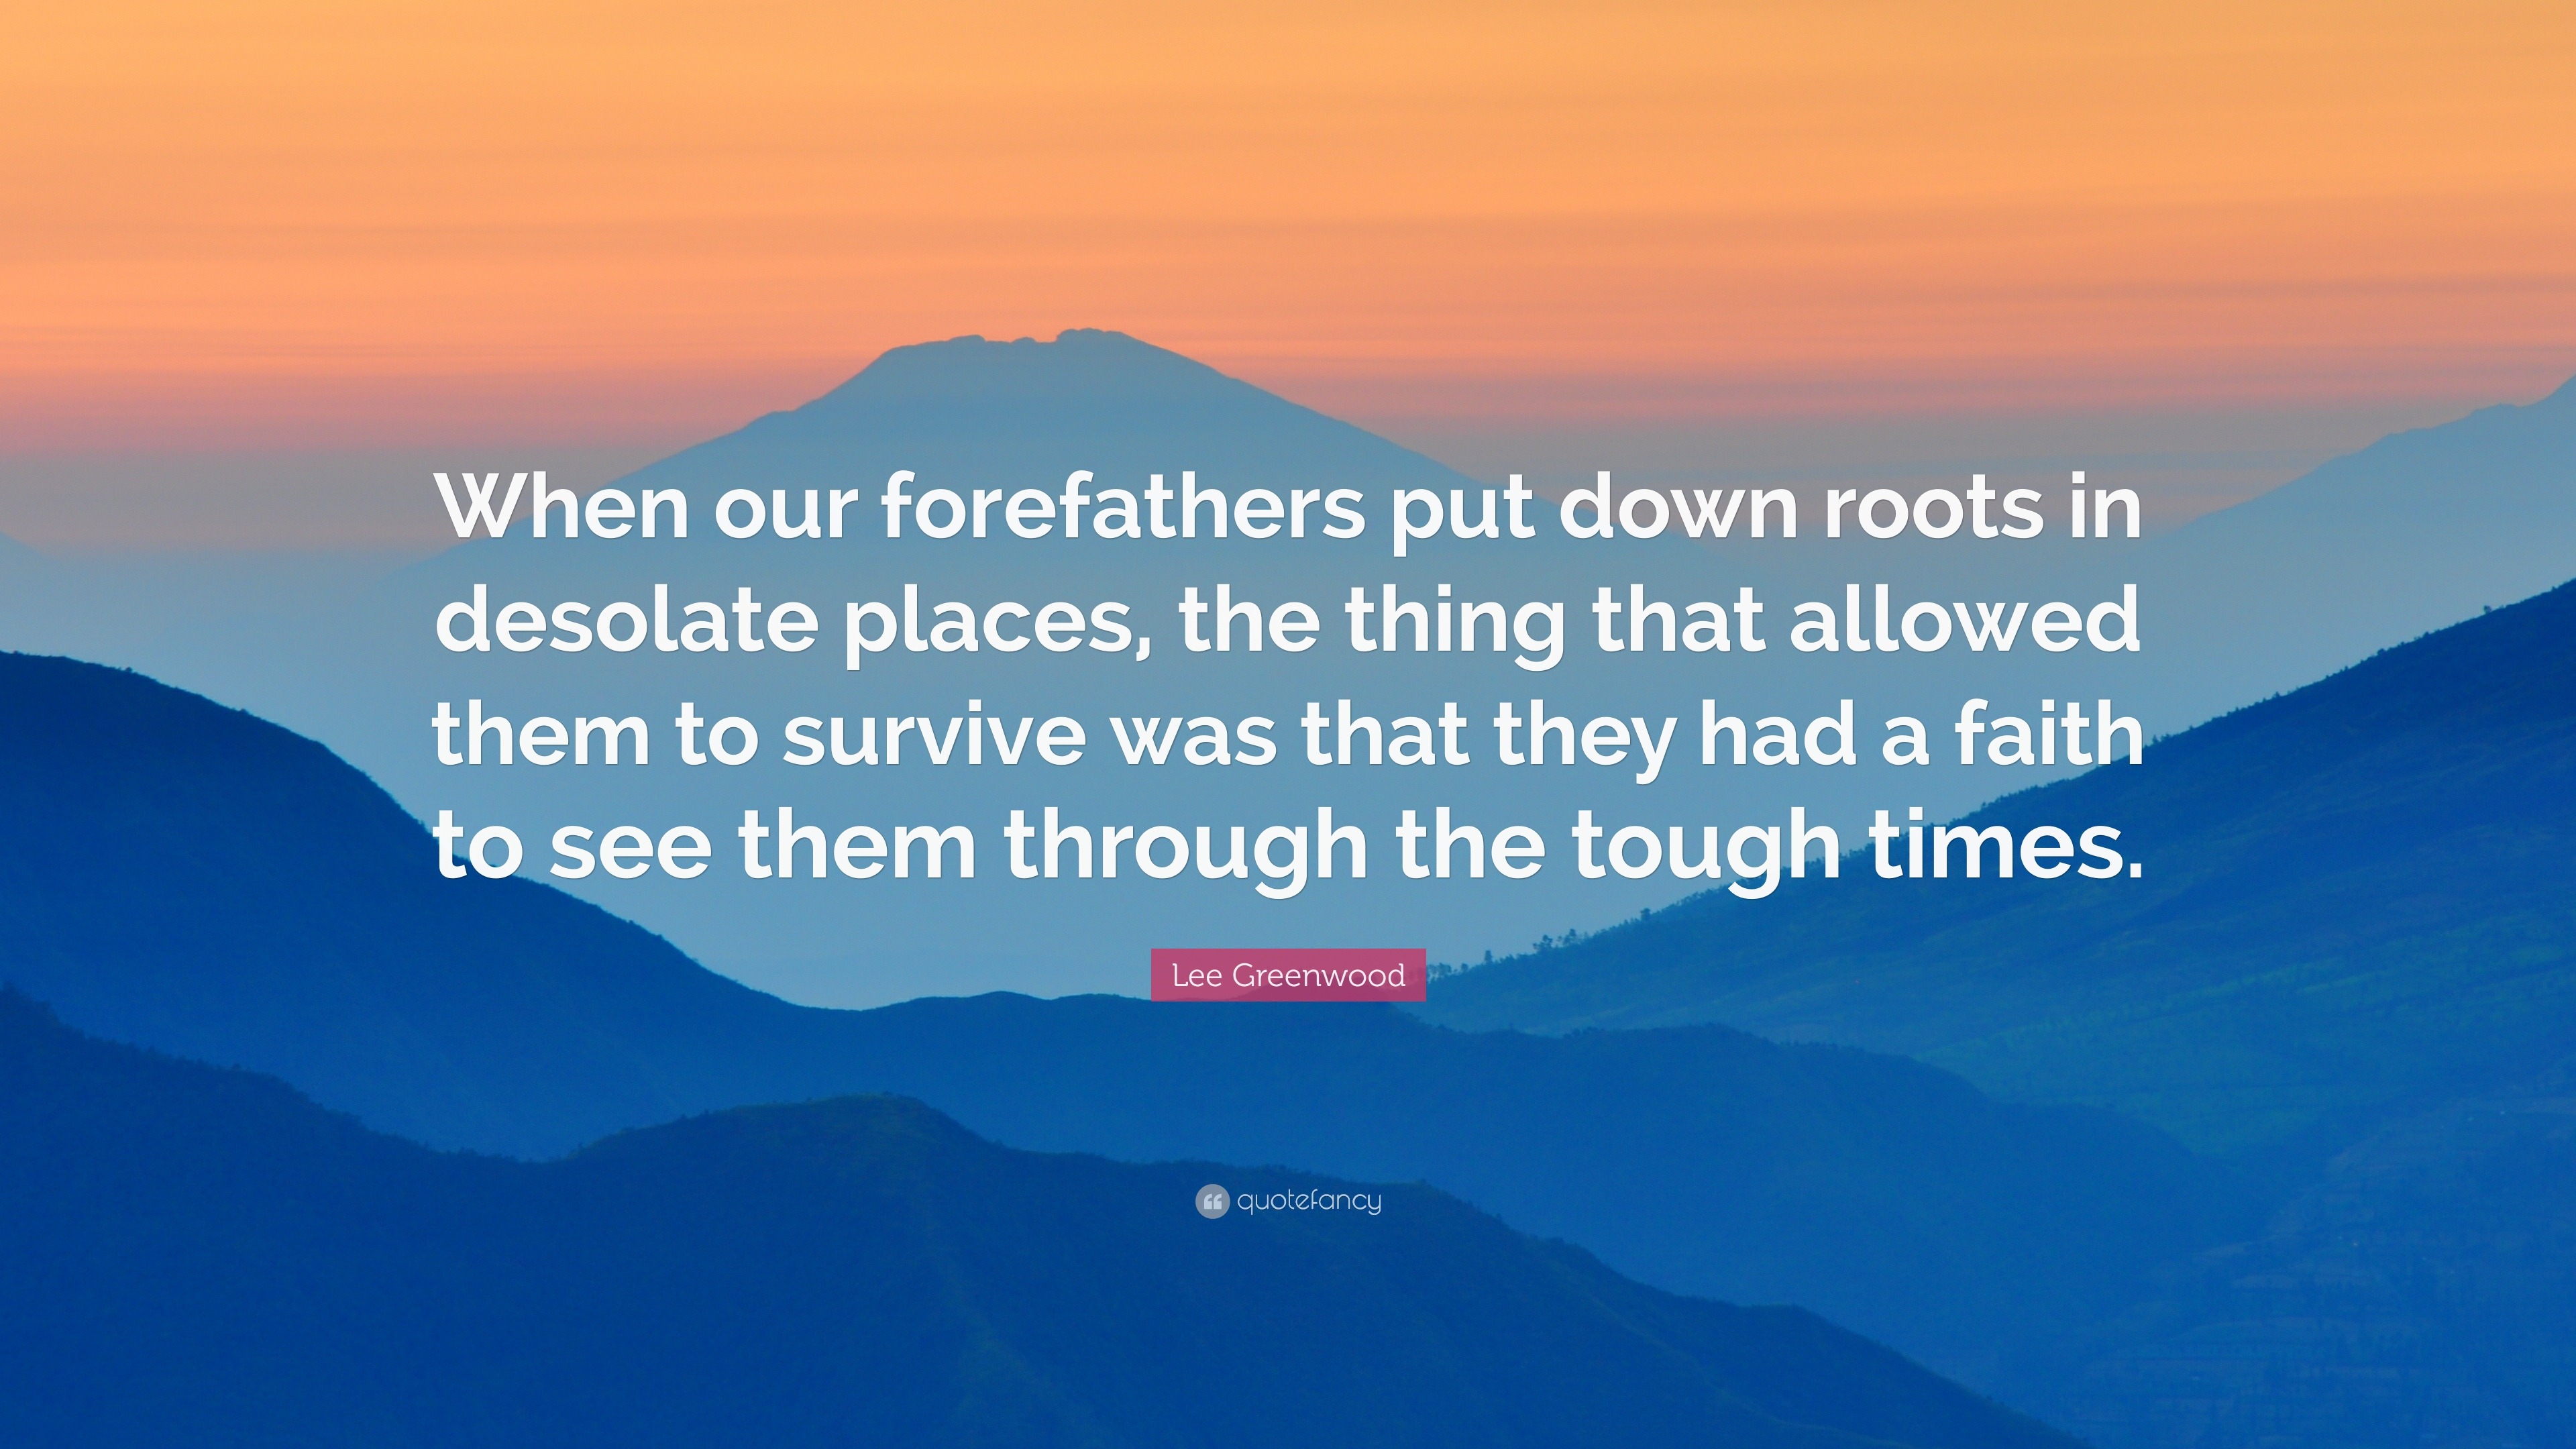 Lee Greenwood Quote: “When our forefathers put down roots in desolate  places, the thing that allowed them to survive was that they had a faith...”